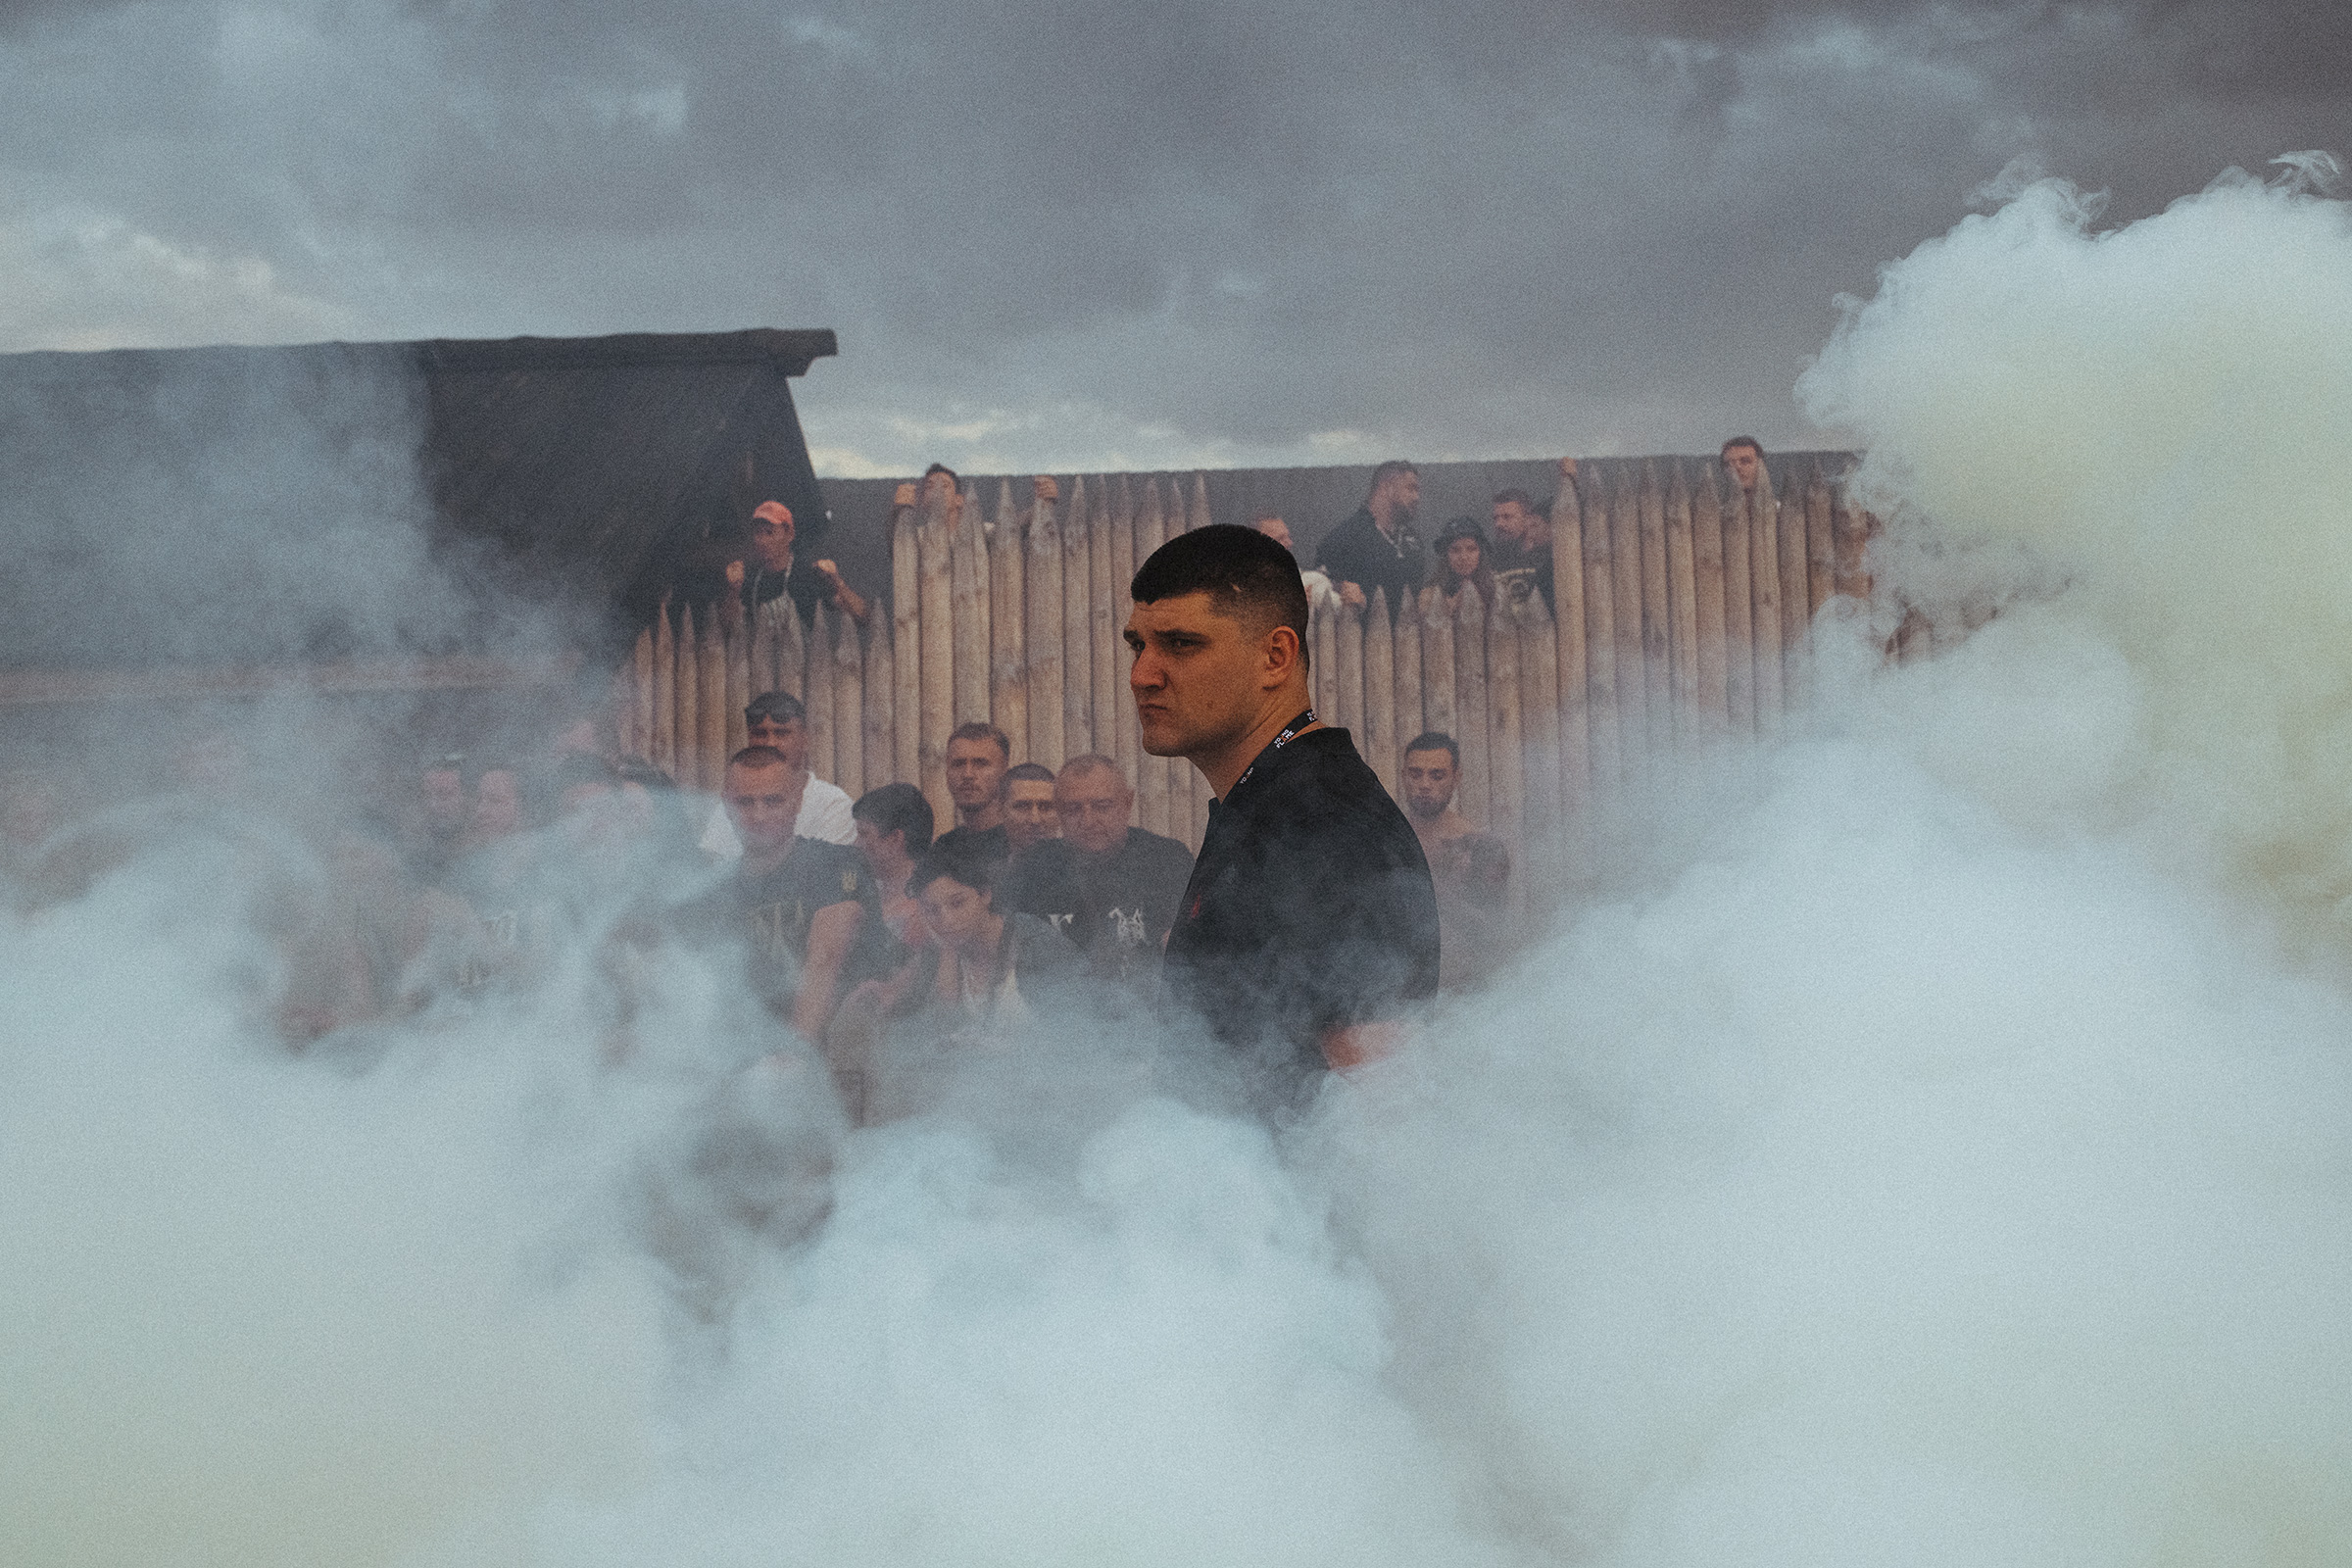 Denis Nikitin, a key figure in the Azov movement's outreach to right-wing extremists in the U.S. and Western Europe, at the Young Flame festival outside Kyiv, a major recruitment event he organized in August 2019.